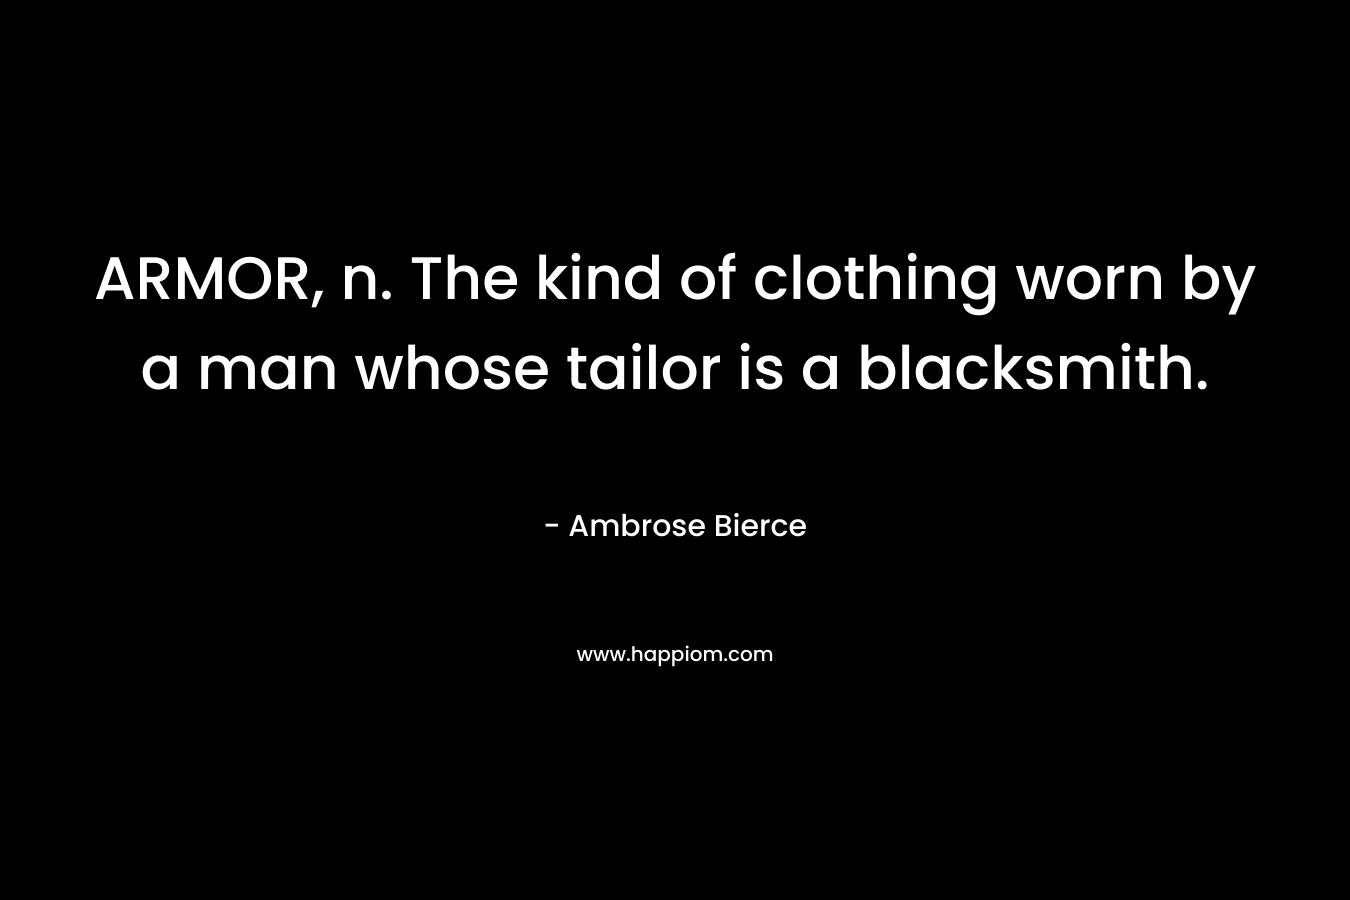 ARMOR, n. The kind of clothing worn by a man whose tailor is a blacksmith. – Ambrose Bierce